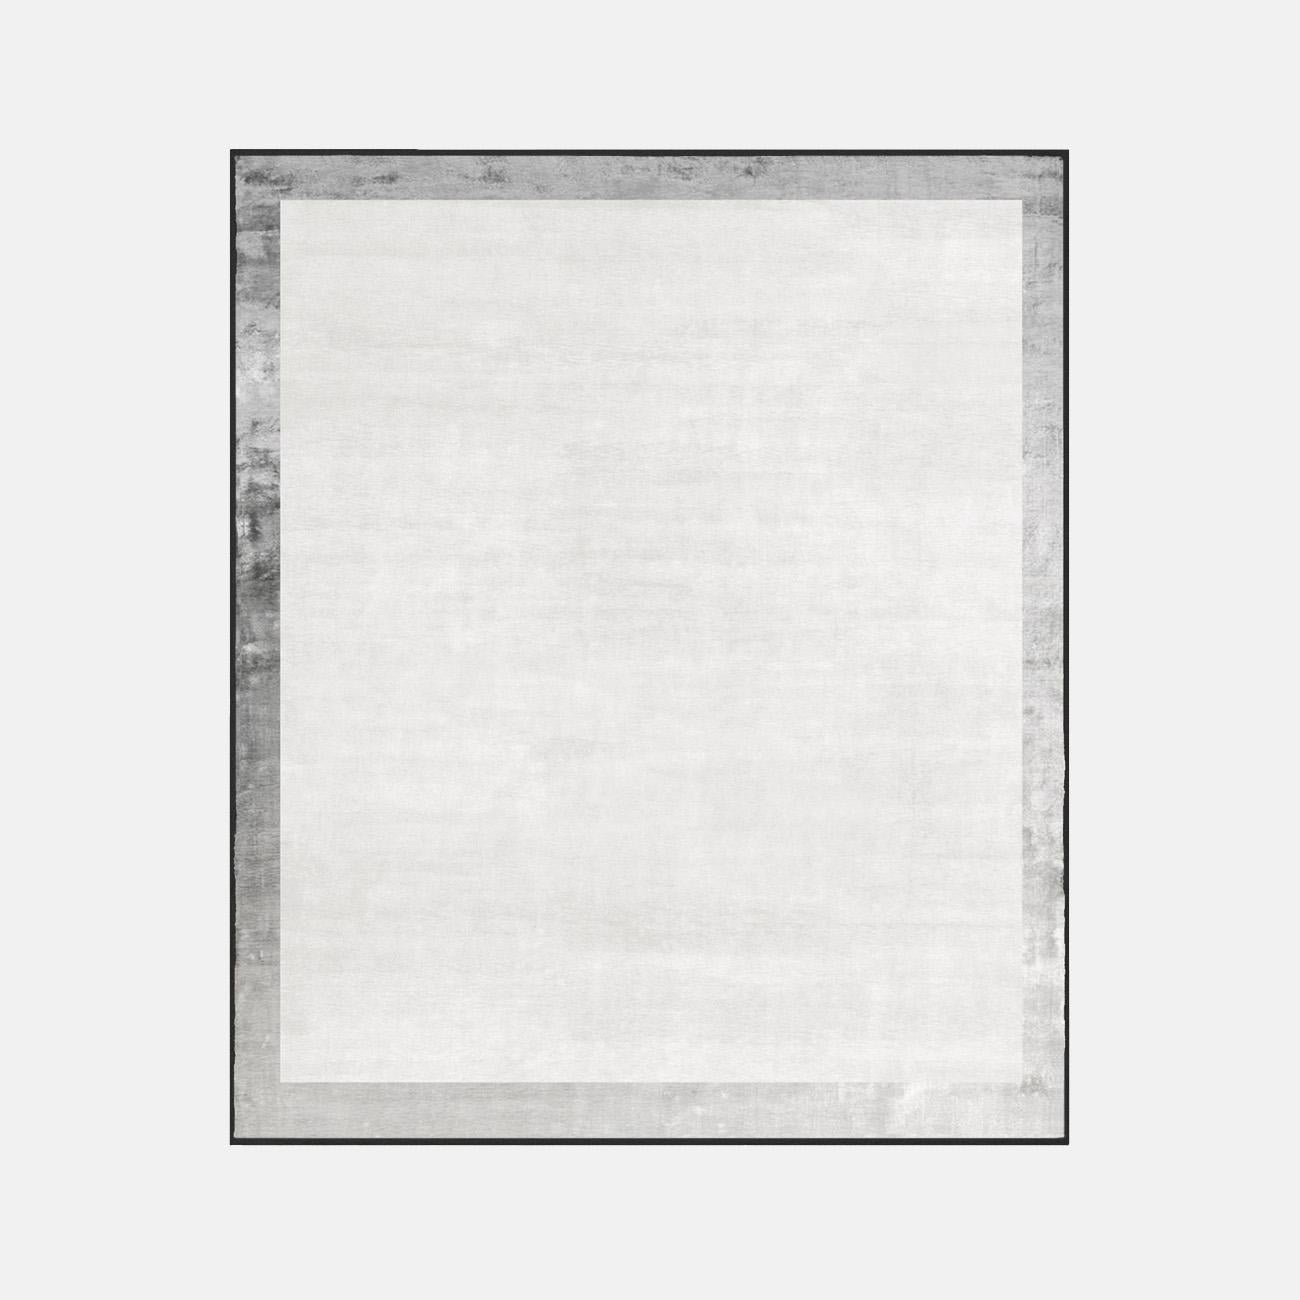 Soleil Neige Tundra Rug by Atelier Bowy C.D.
Dimensions: W 243 x L 300 cm.
Materials: Wool, silk.

Available in W140 x L220, W170 x L240, W210 x L300, W230 x L300, W243 x L300 cm.

Atelier Bowy C.D. is dedicated to crafting contemporary handmade